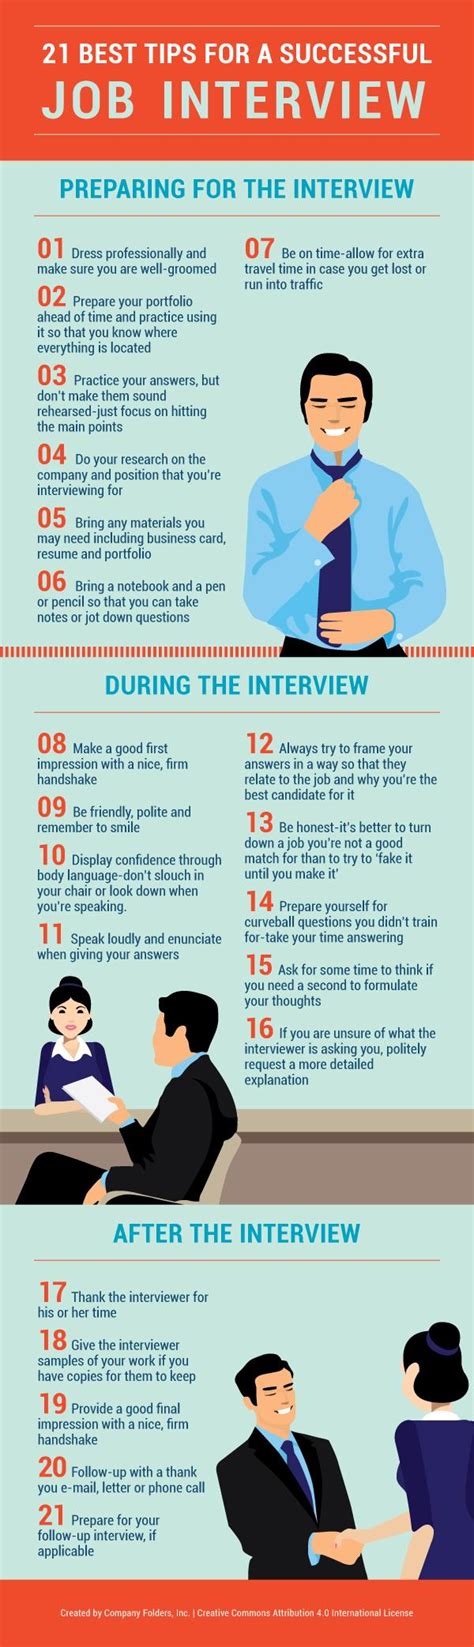 21 Tips For A Successful Job Interview